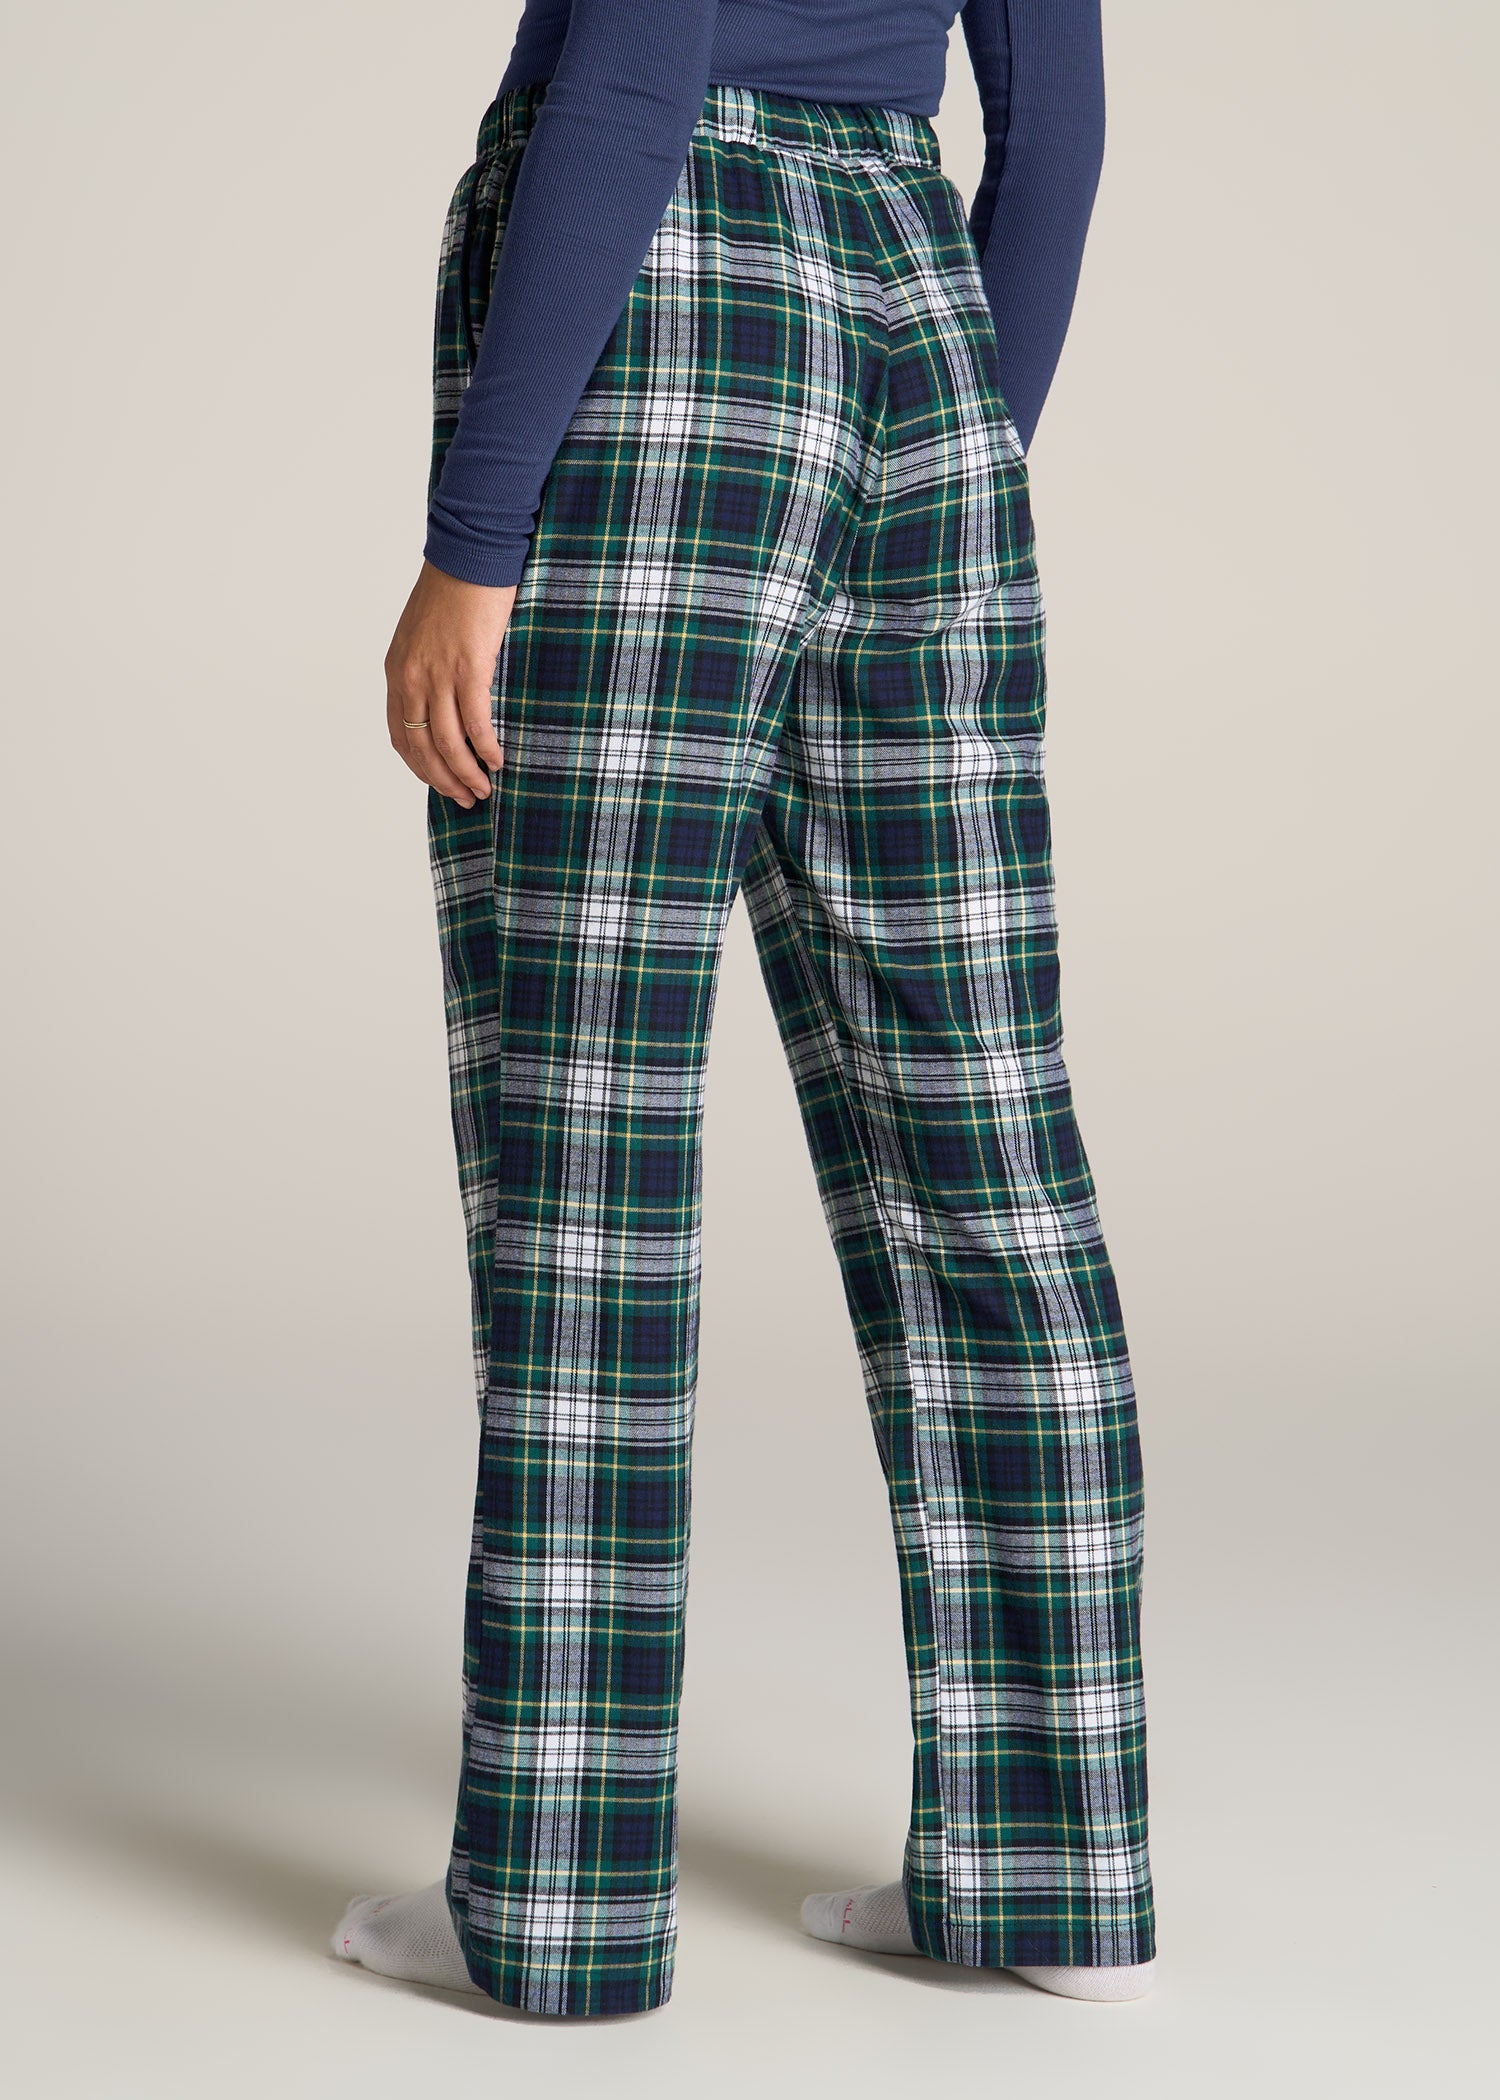 Open-Bottom Flannel Women's Tall Pajama Pants in Green and Navy Tartan